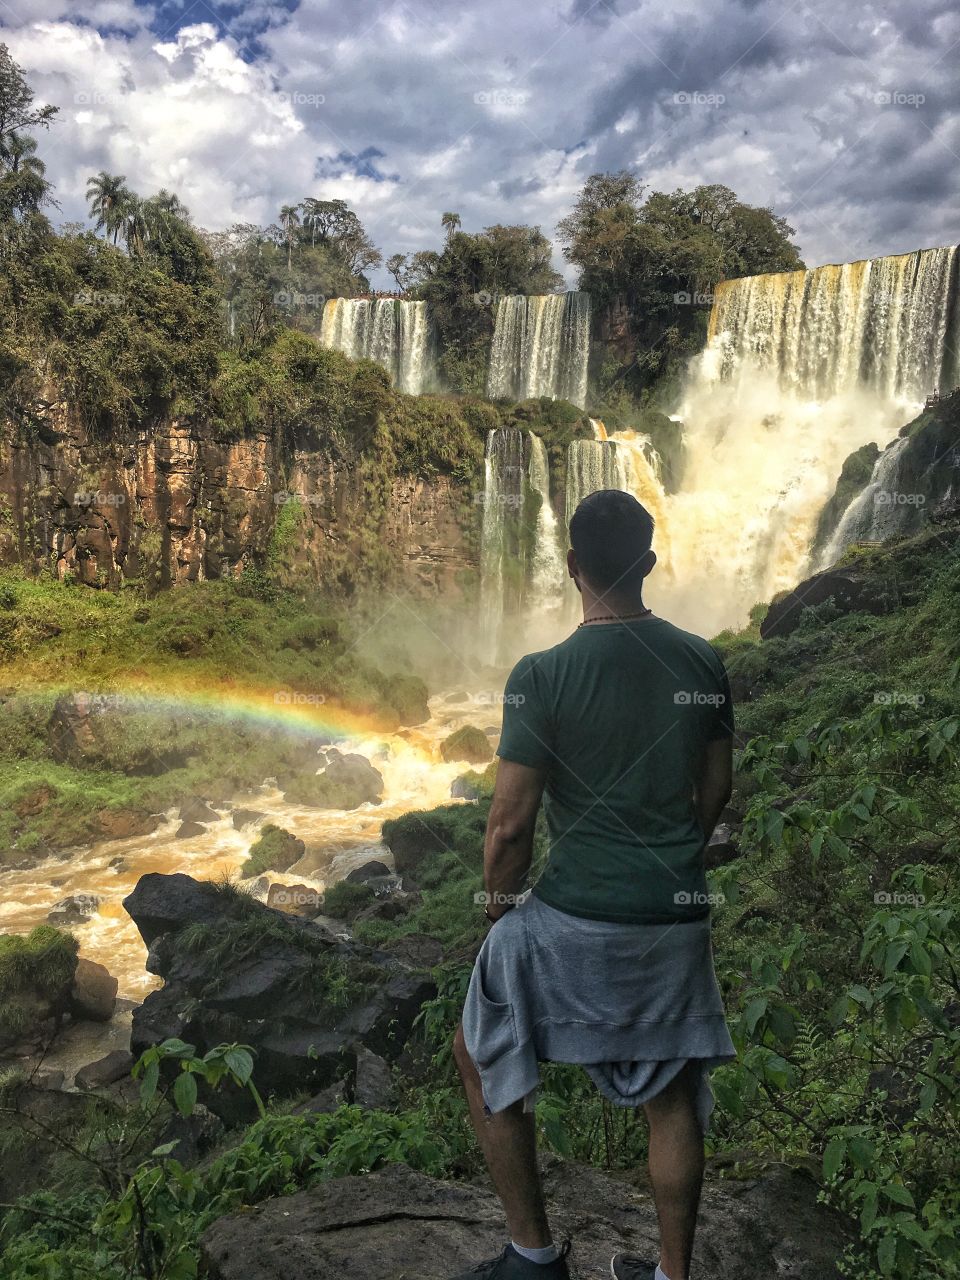 Rainbow around iguazu falls in Argentina, took a moment to just embrace the scene. Nature can be so surreal. 